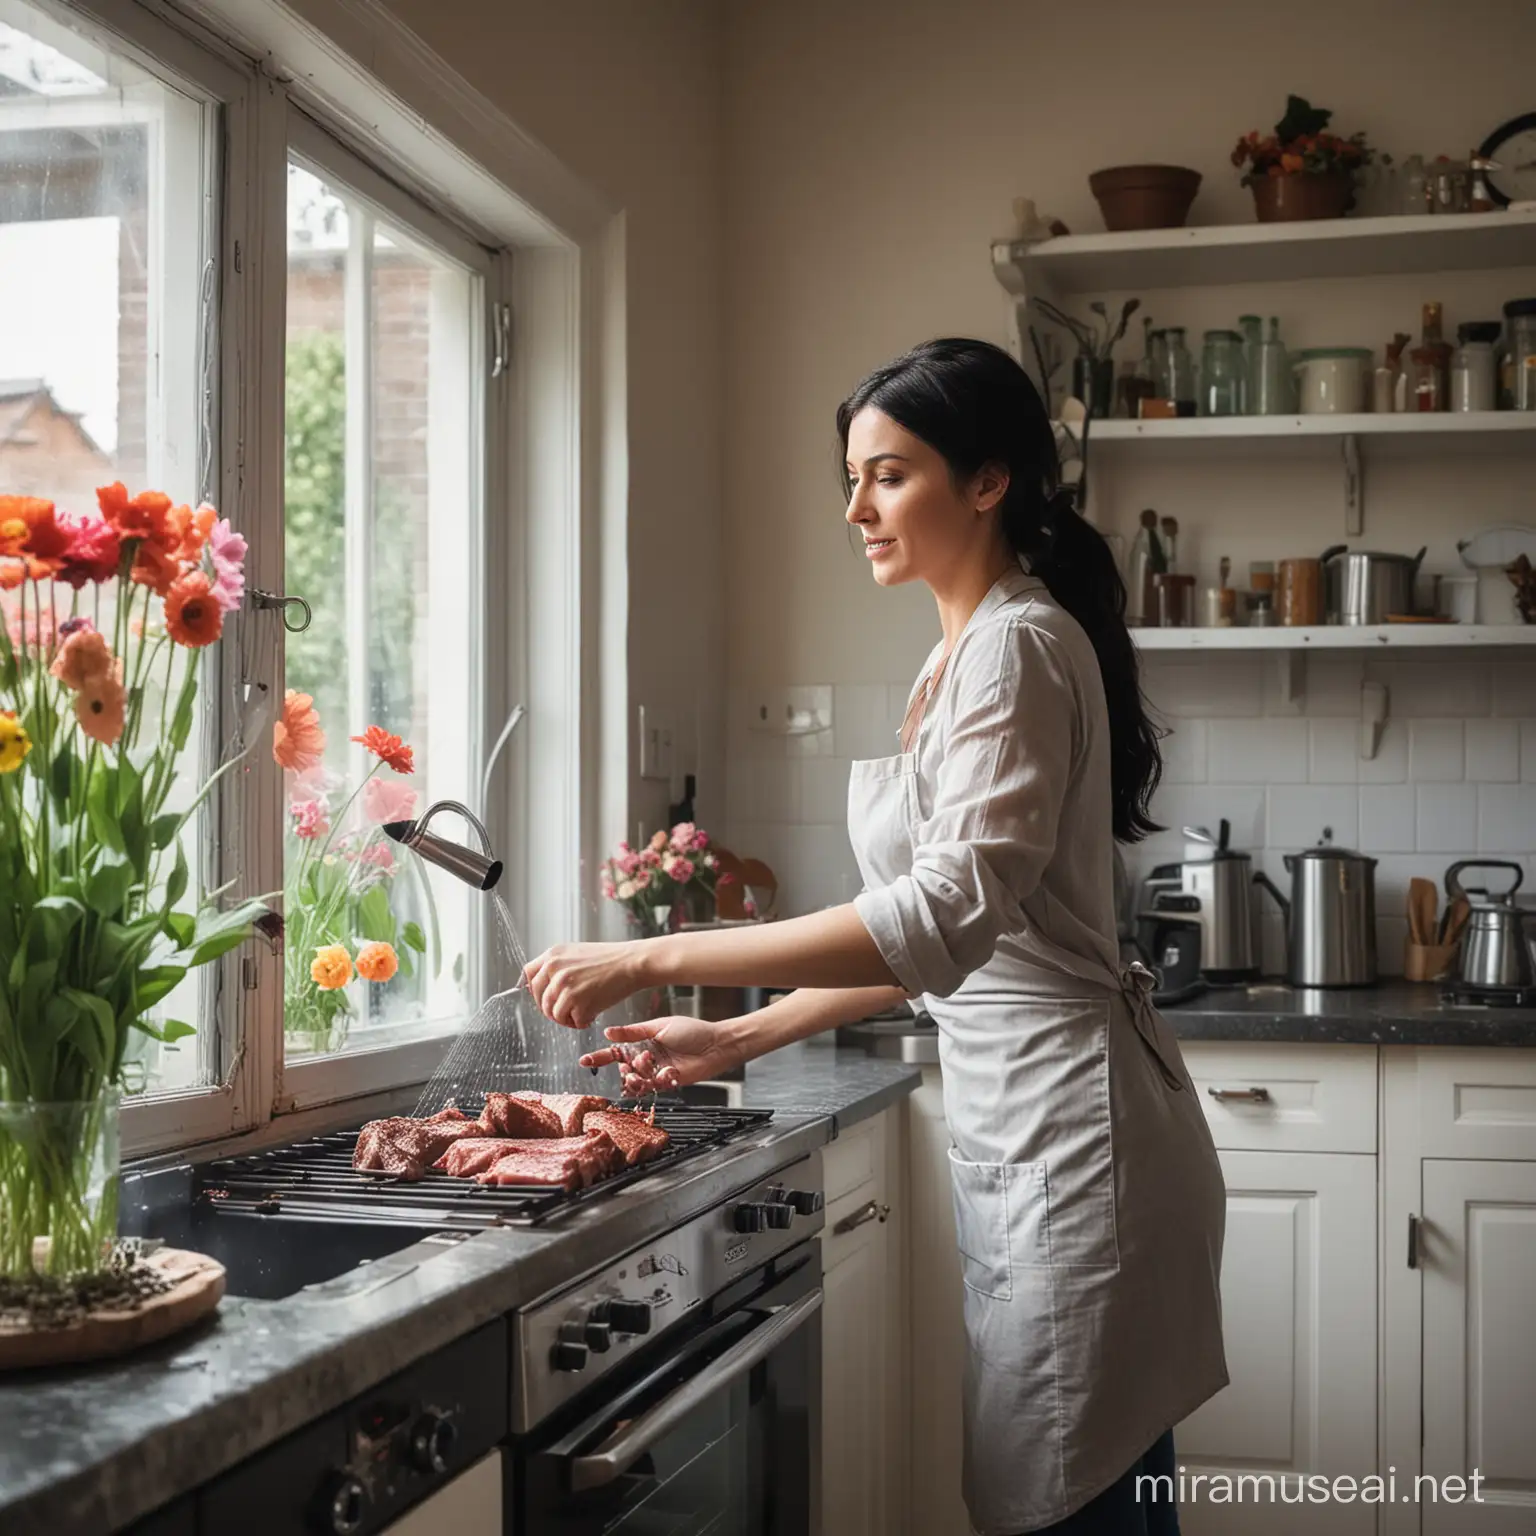 A beautiful dark haired woman cooking meat in the oven and watering flowers in the kitchen window at the same time